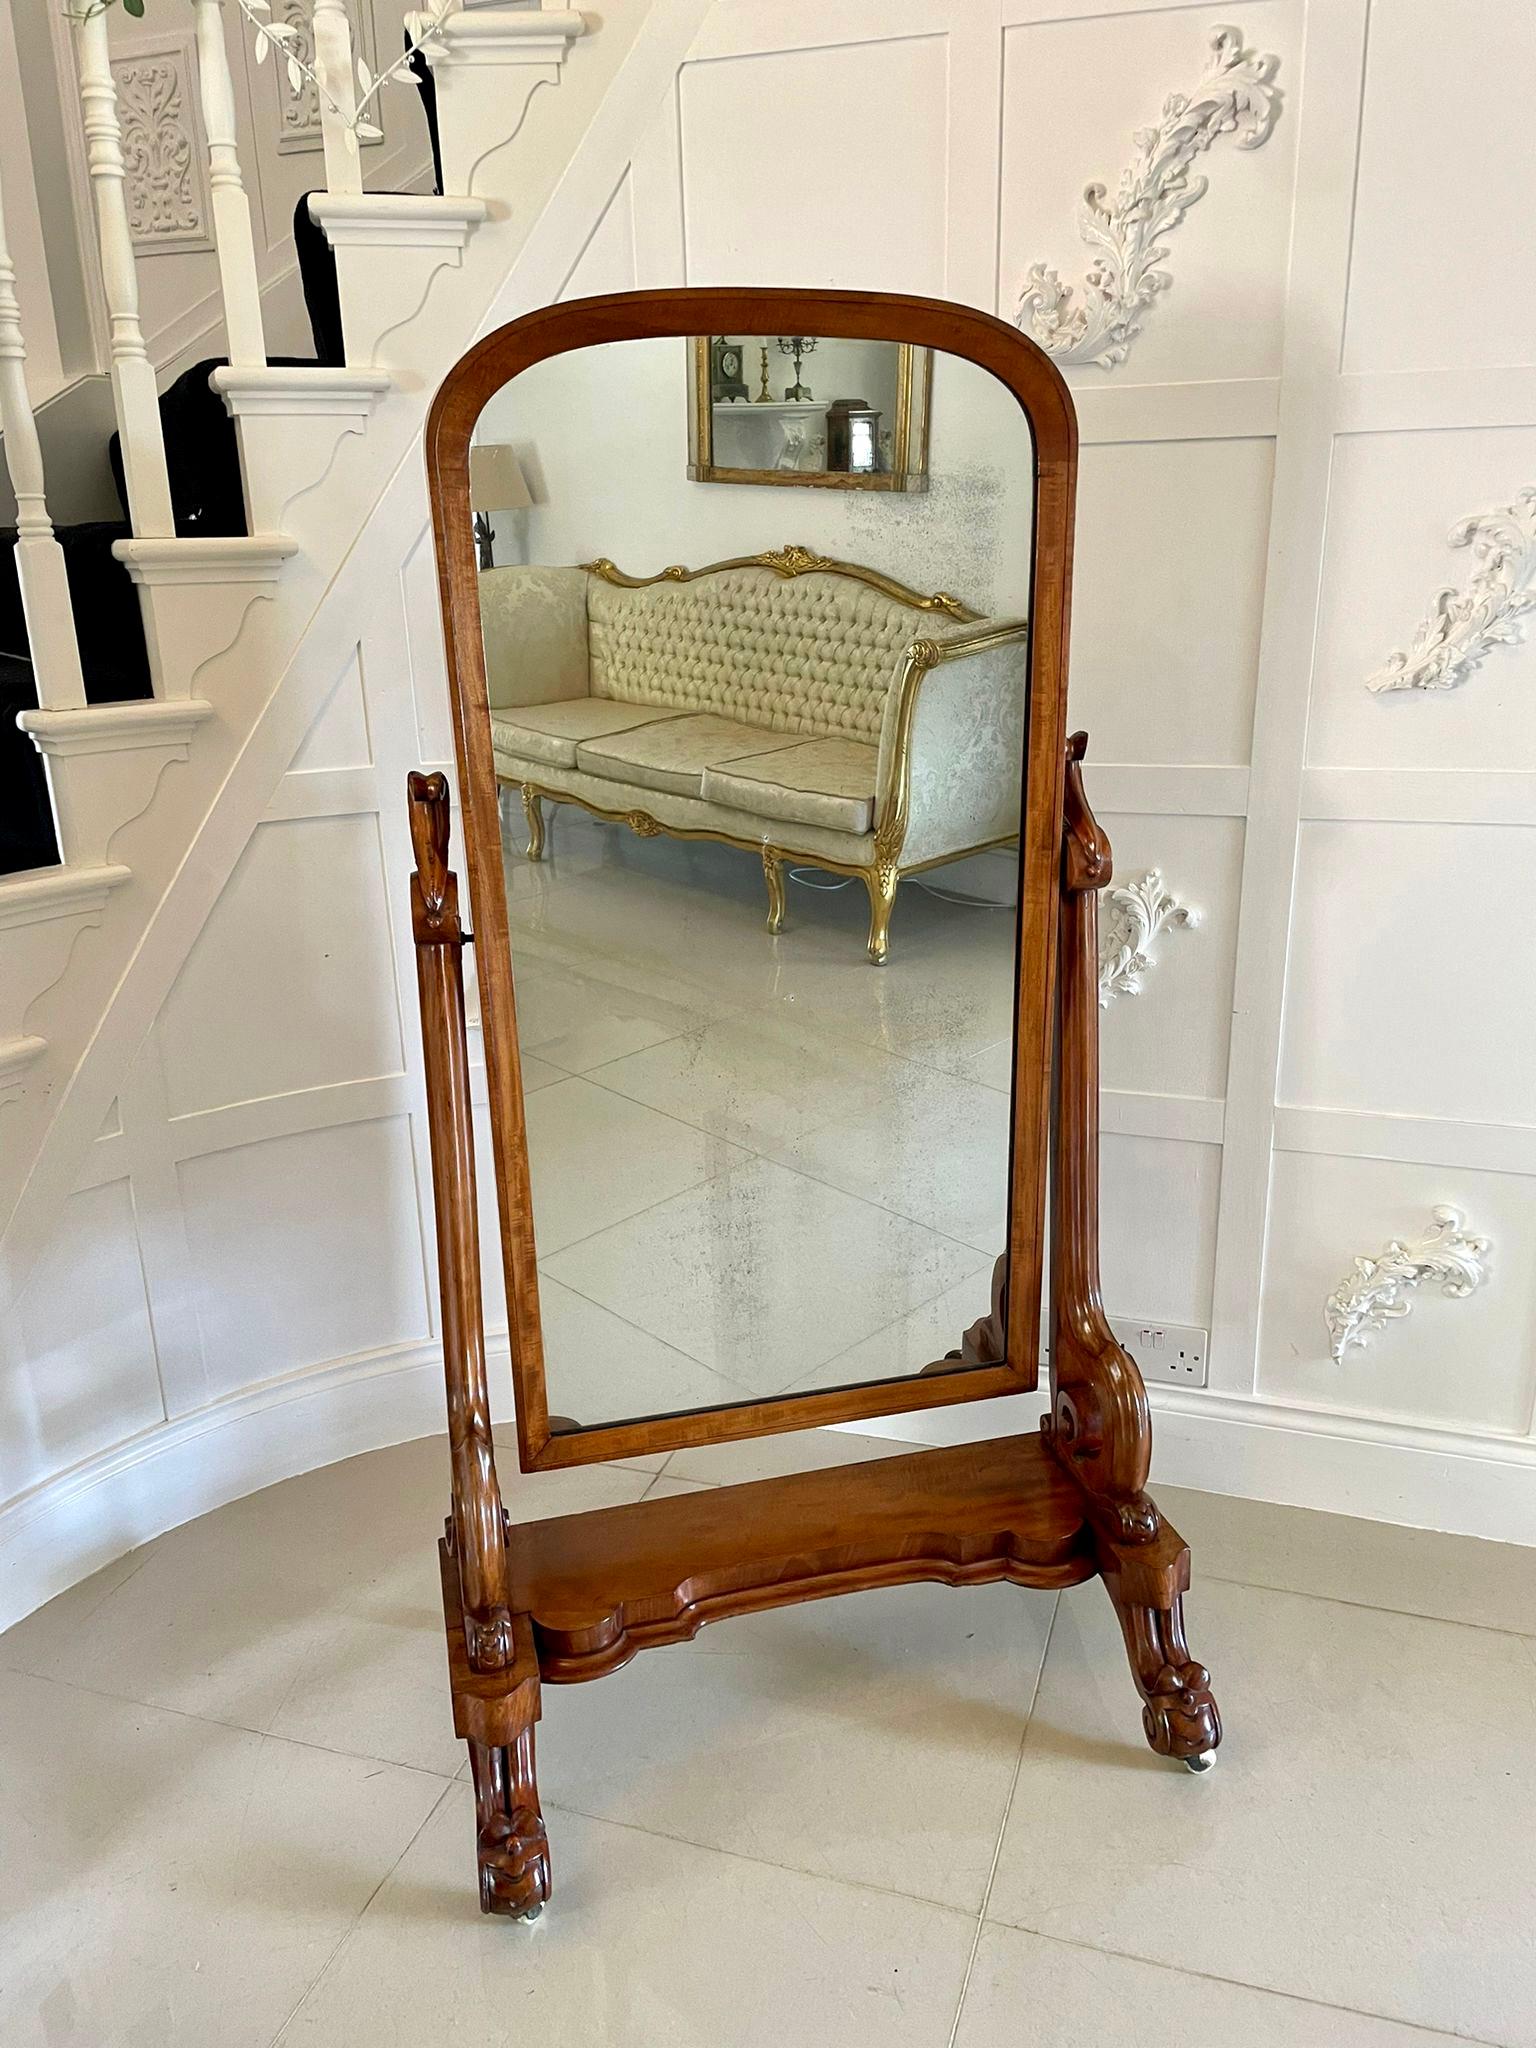 Antique Victorian quality mahogany cheval mirror having a quality mahogany arched top cheval mirror supported by two shaped carved mahogany scroll supports standing on a shaped figured mahogany platform with a moulded edge raised on shaped carved